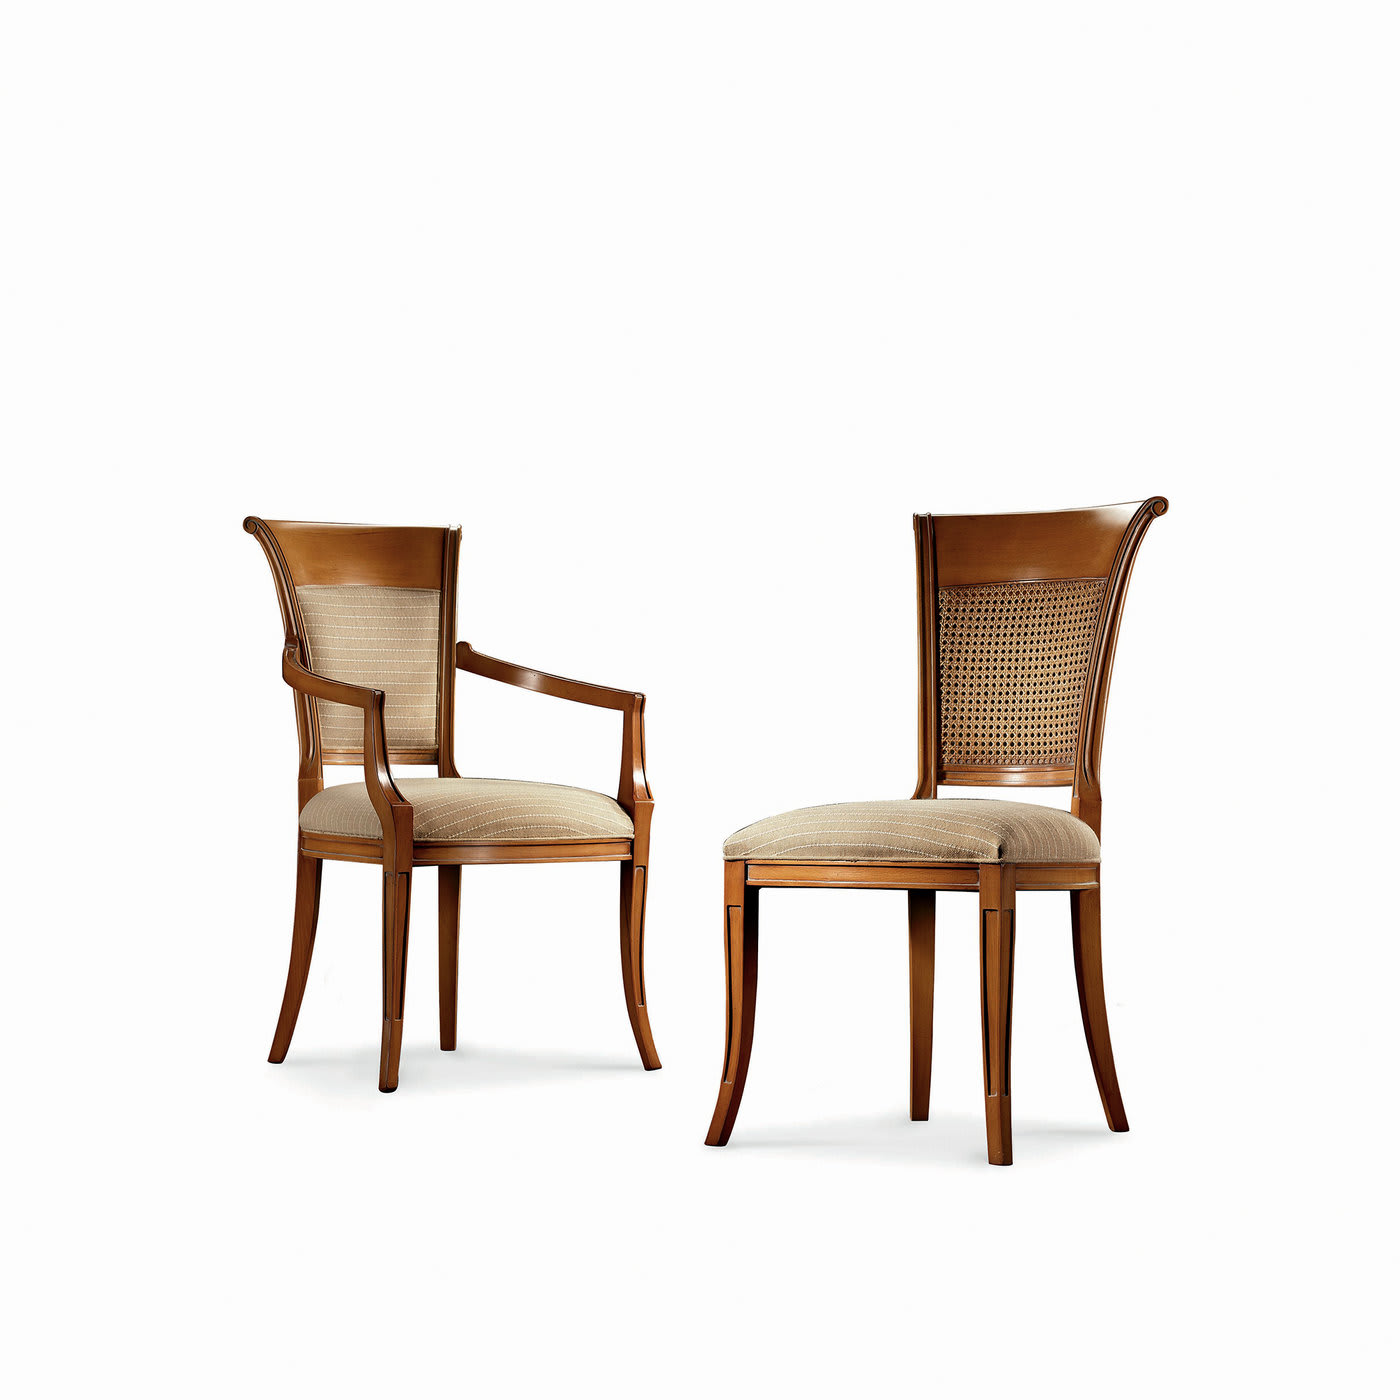 Set of 6 Classic Dining Chairs #1 - Modenese Gastone